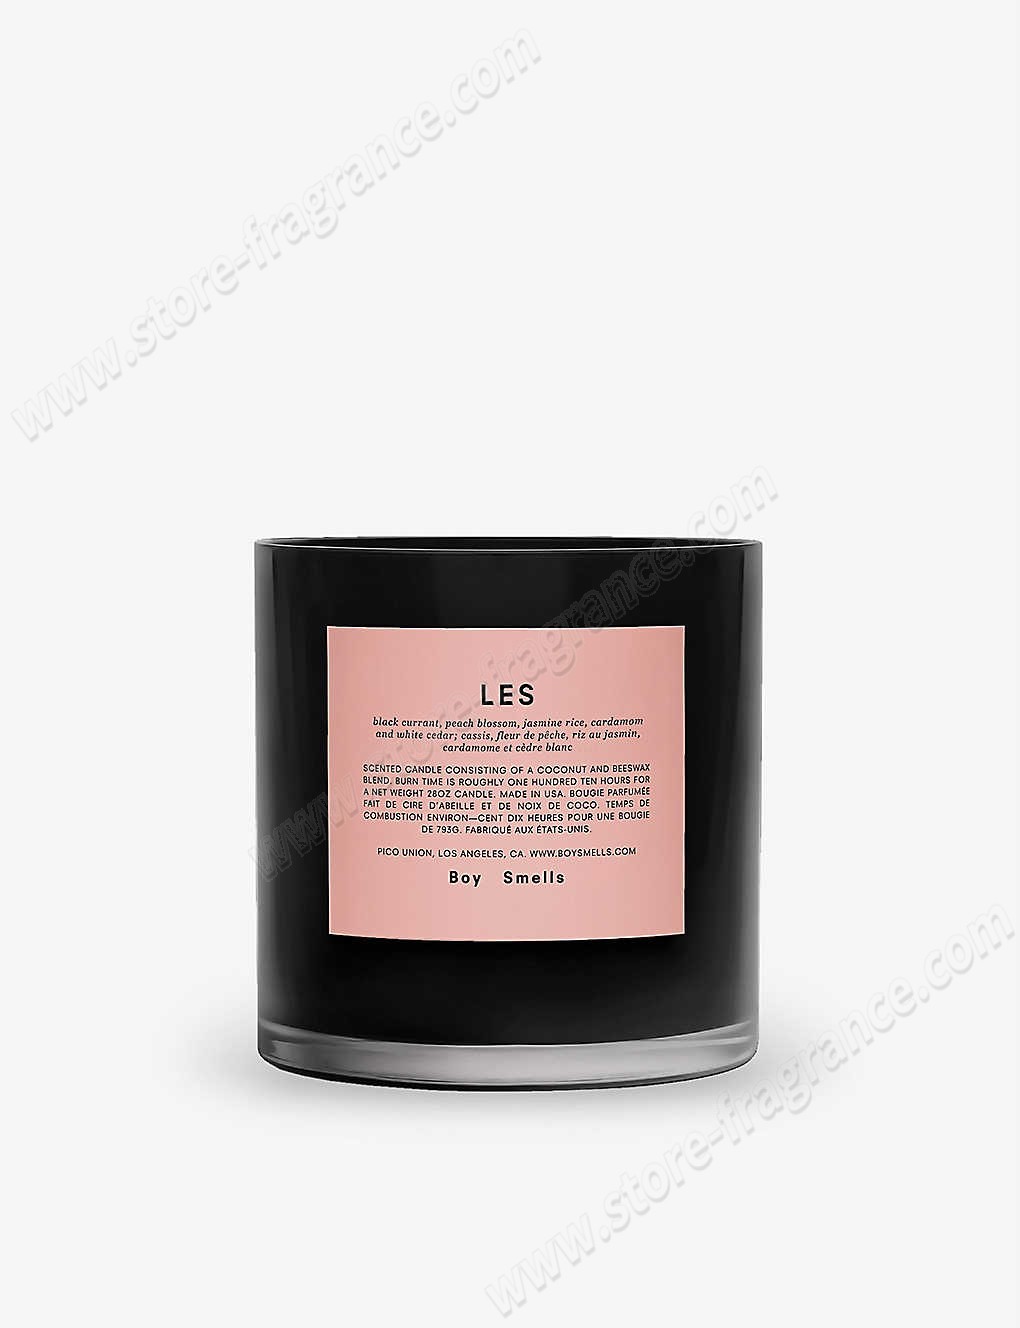 BOY SMELLS/LES scented candle 793g ✿ Discount Store - BOY SMELLS/LES scented candle 793g ✿ Discount Store